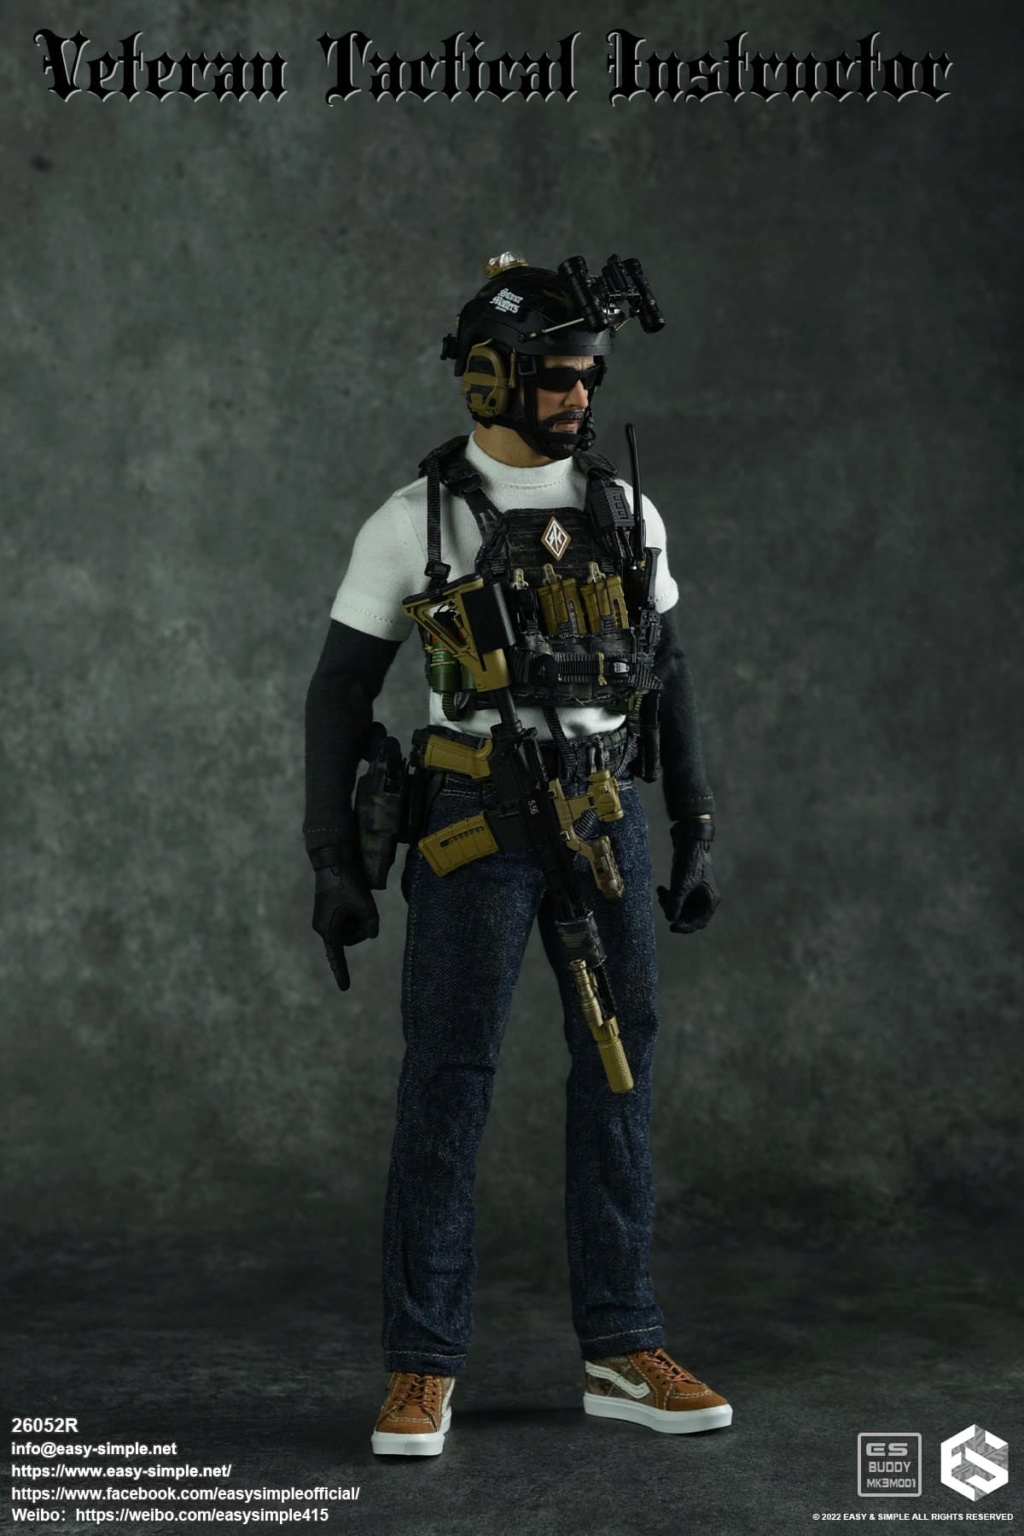 NEW PRODUCT: Easy&Simple: 26052R 1/6 Scale Veteran Tactical Instructor 31158510